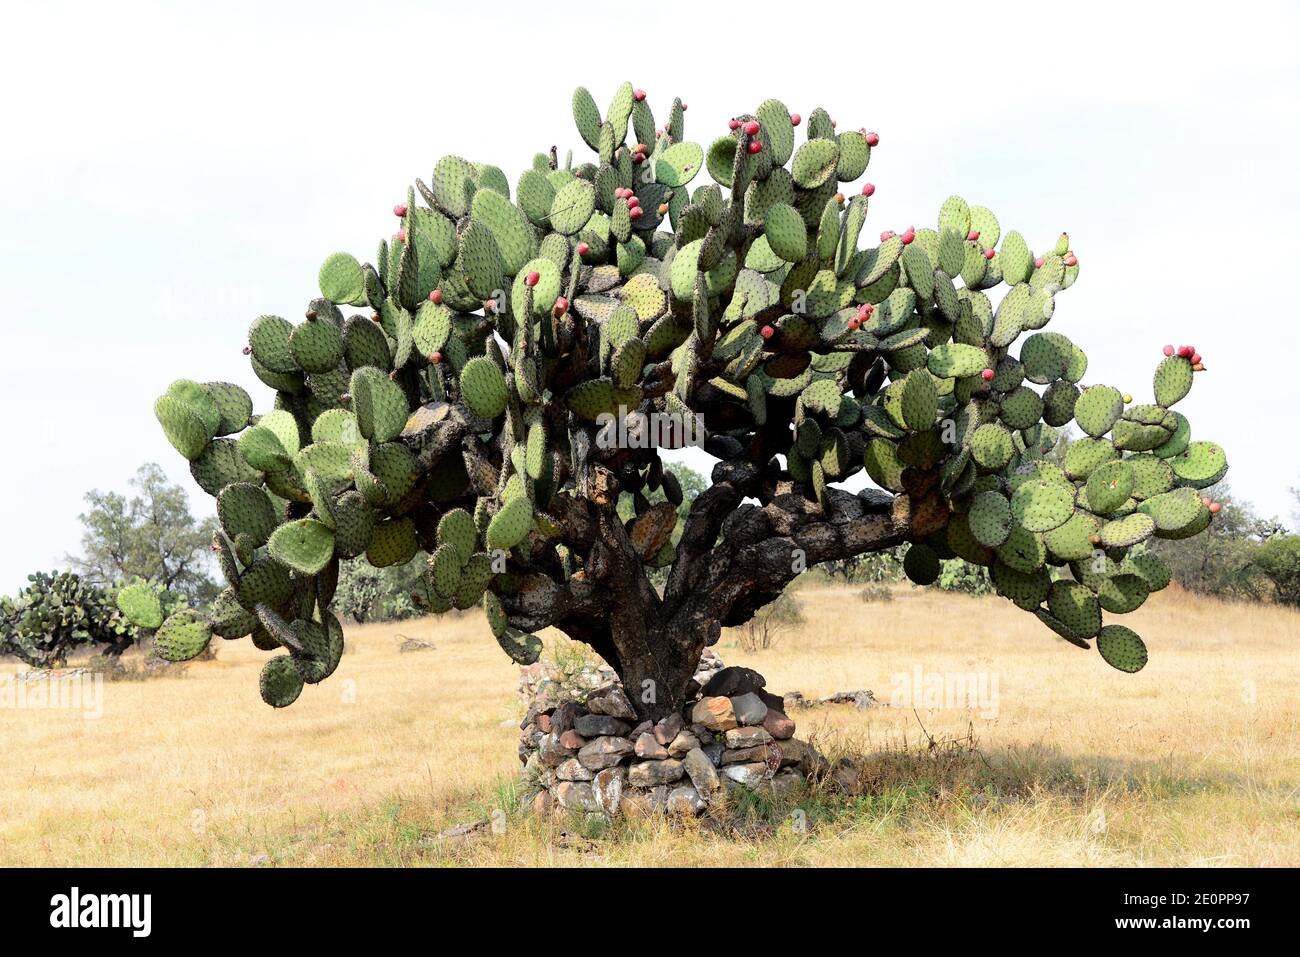 Barbary fig or Indian fig opuntia (Opuntia ficus-indica) is a cactus native to Mexico but naturalized in many arid or semiarid region of the World. Stock Photo